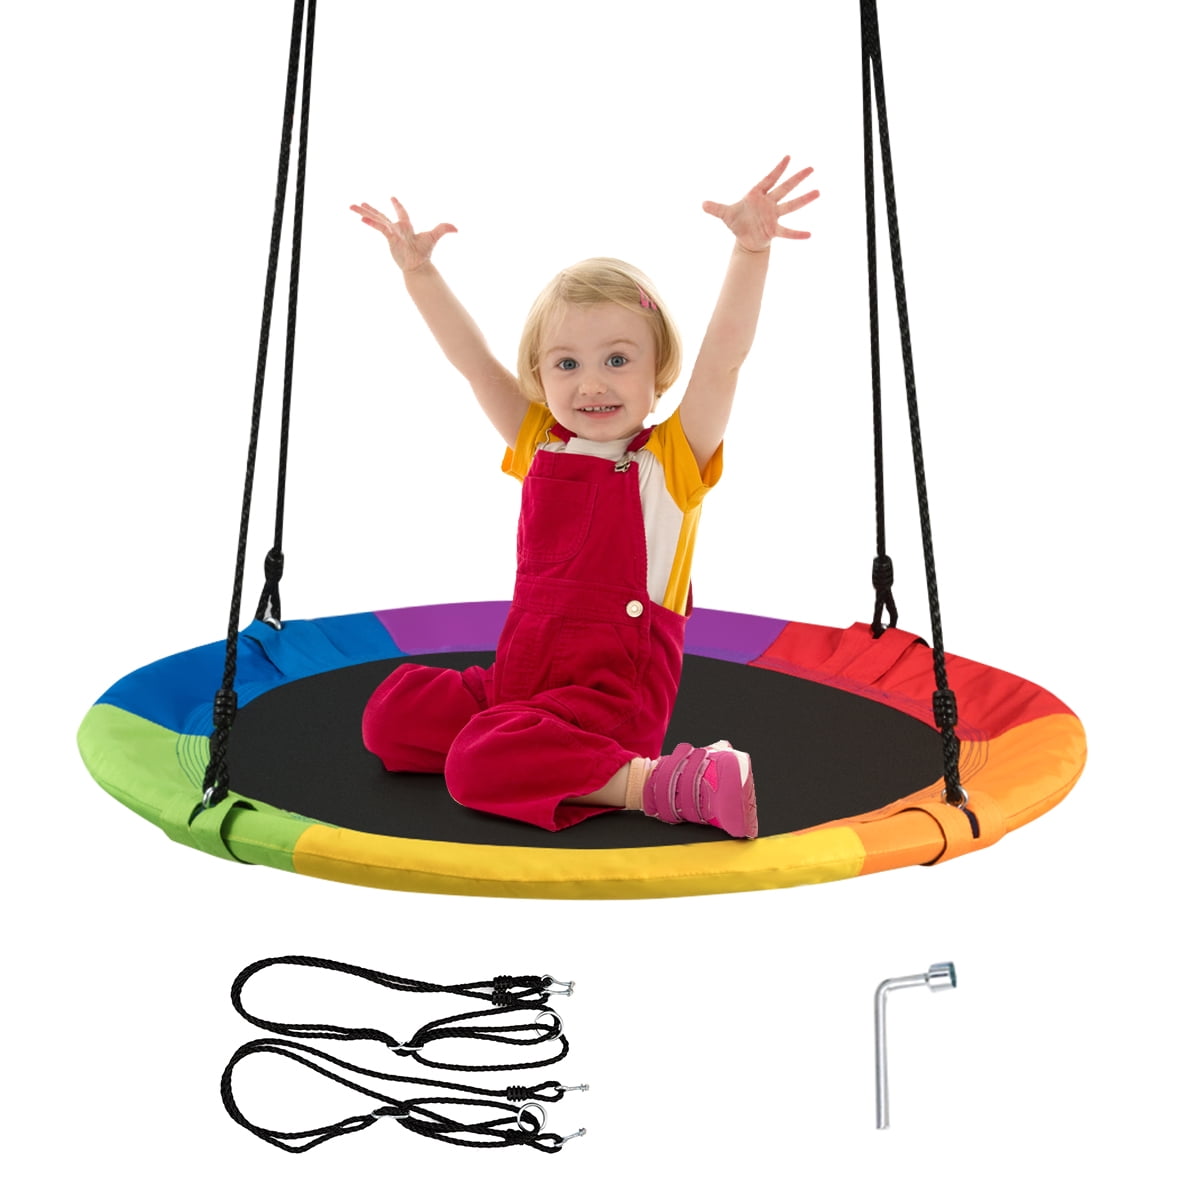 40" Flying Saucer Tree Swing 700lbs Oxford Fabric for Kids In/Outdoor Swing Toys 